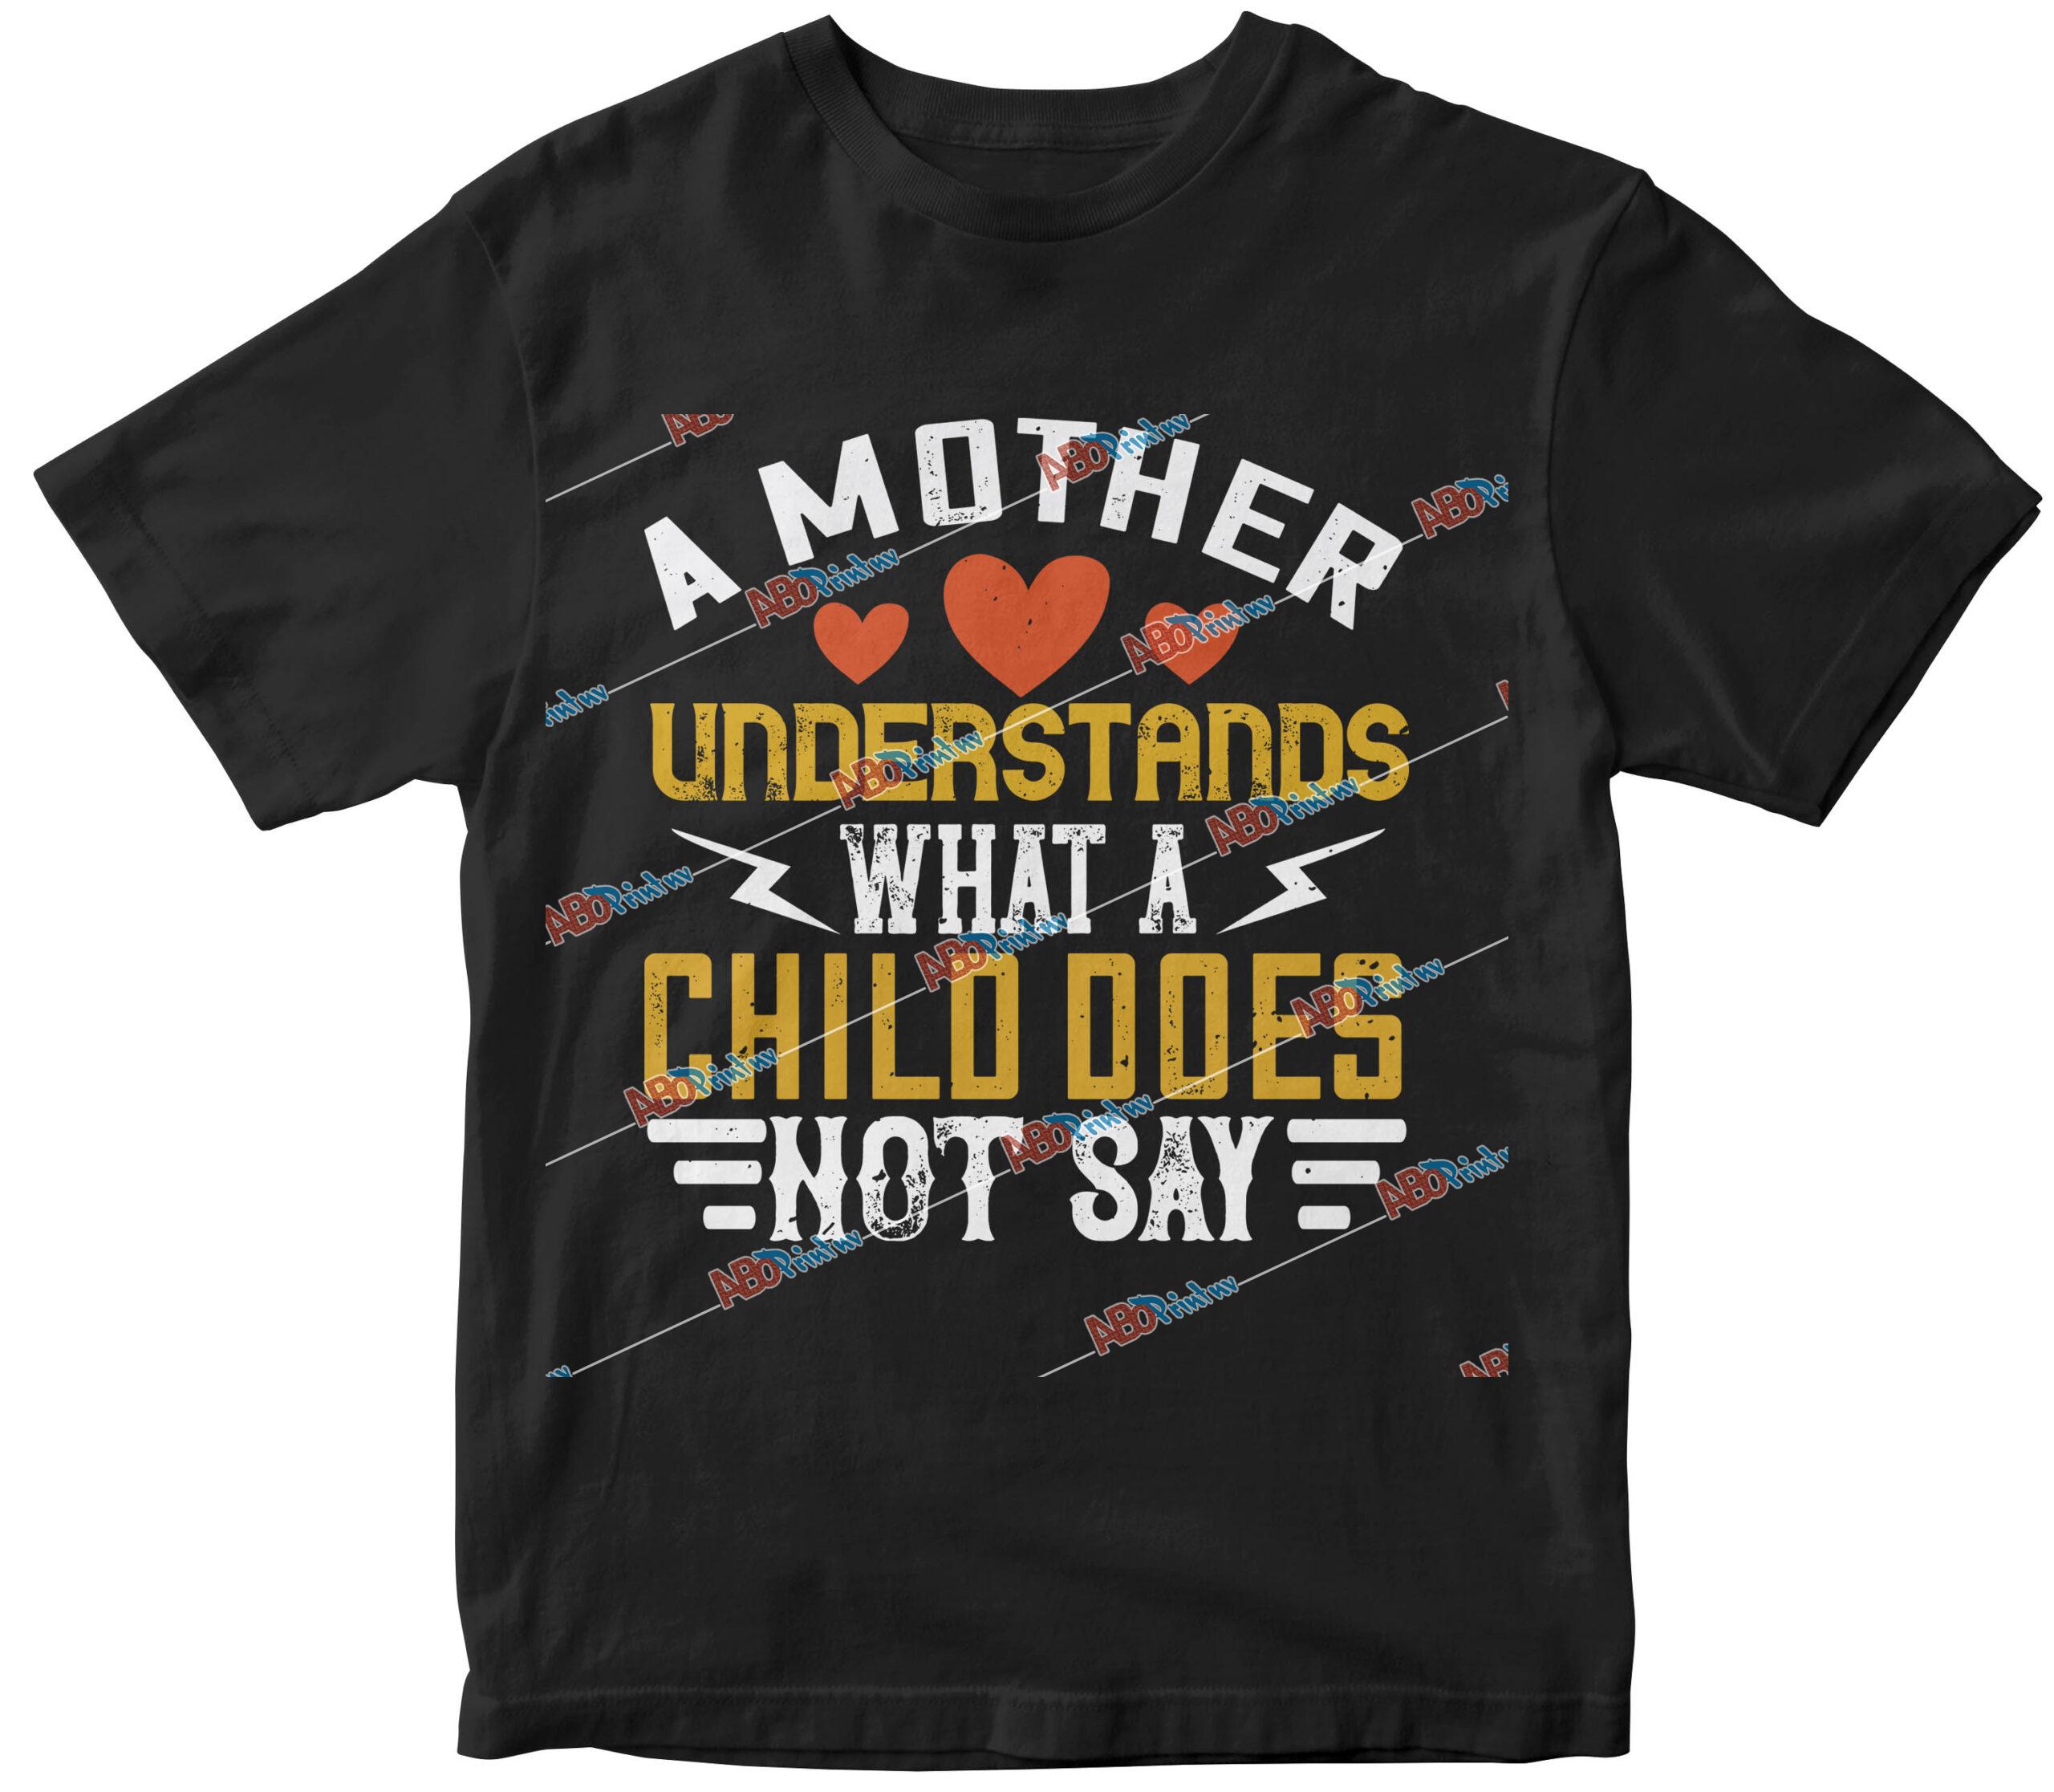 A mother understands what a child does not say.jpg